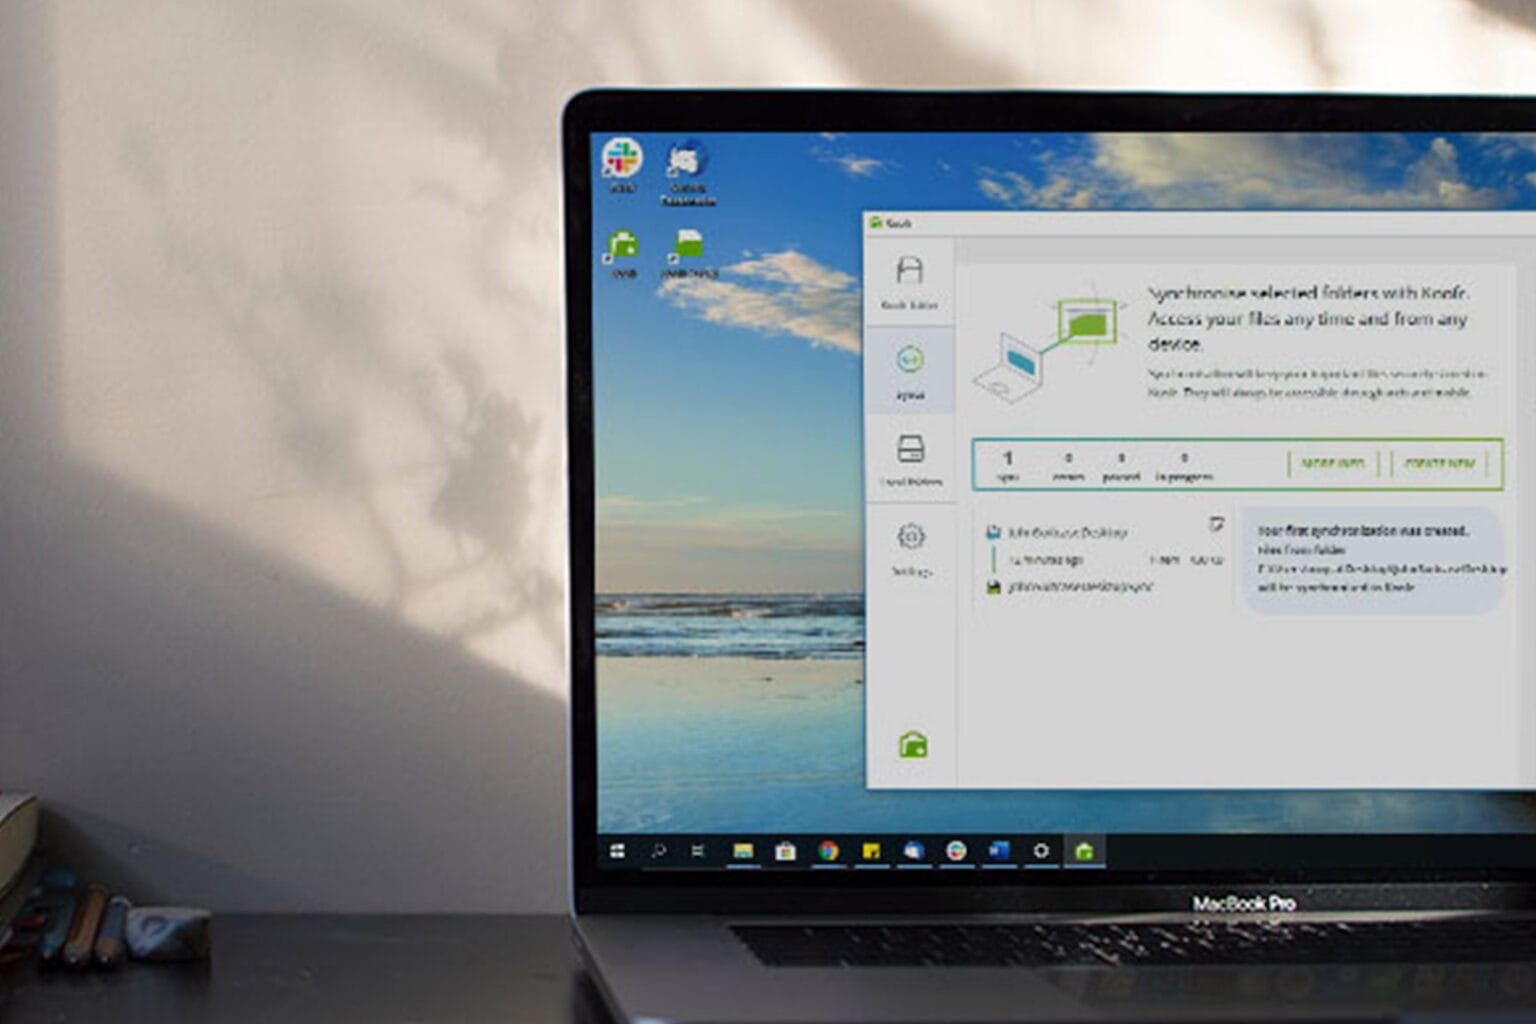 Clear up some room with these three deals on cloud storage.